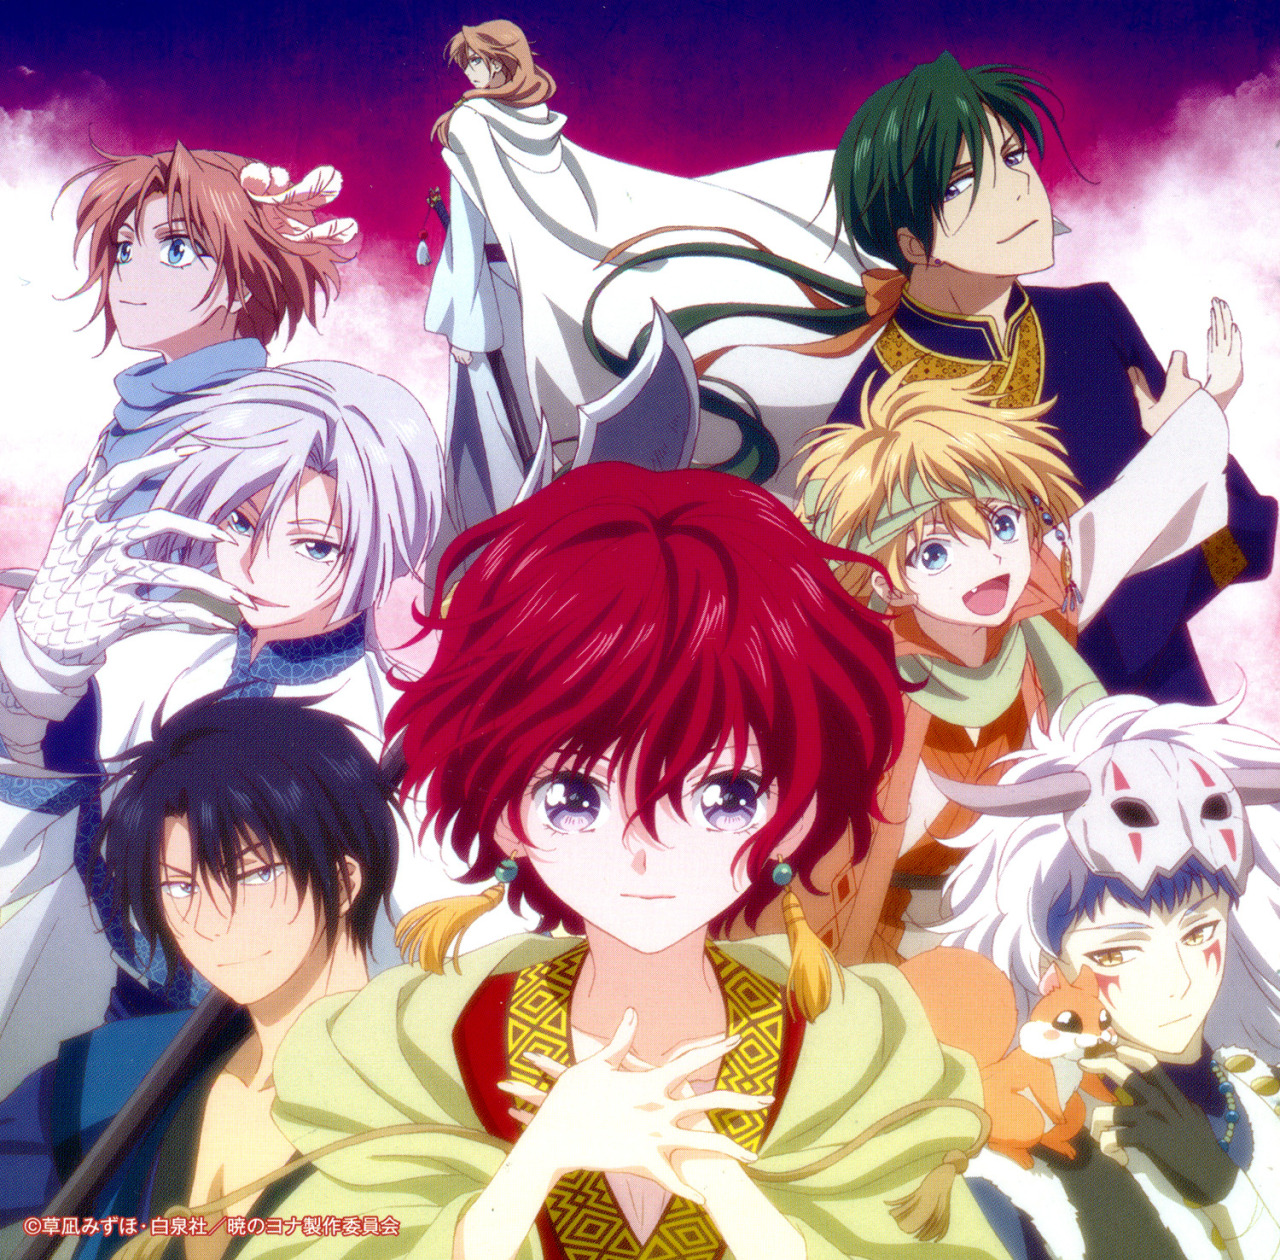 Ookami S Blog Anime Review Yona Of The Dawn